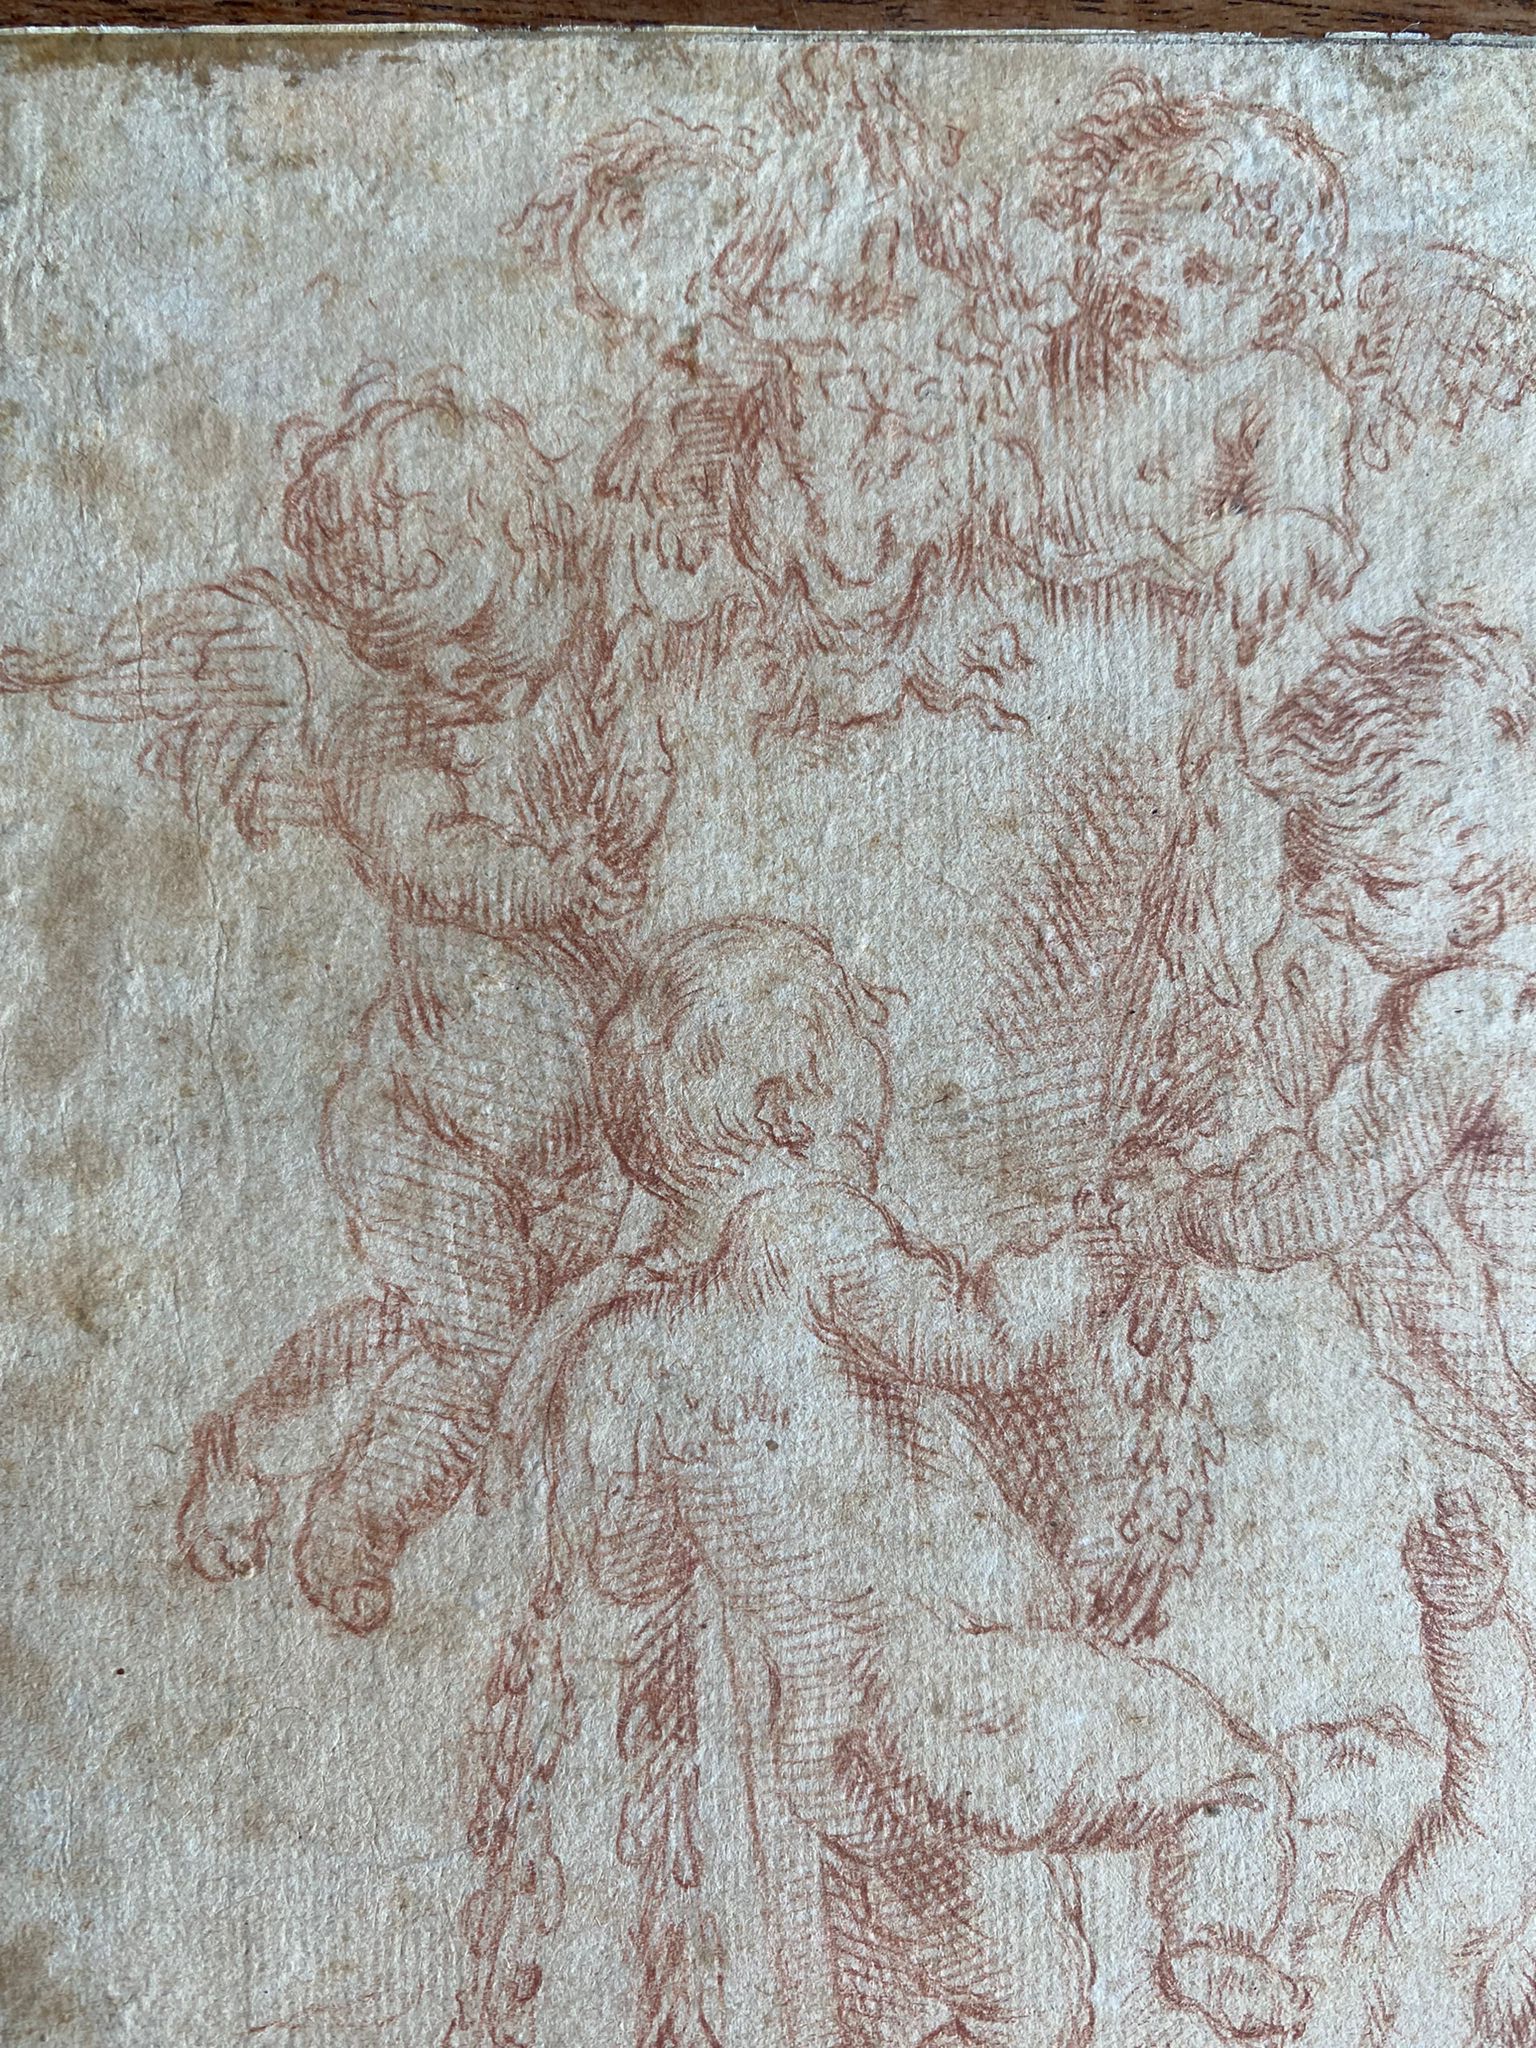 A GROUP OF SIX OLD MASTER DRAWINGS - Image 10 of 17